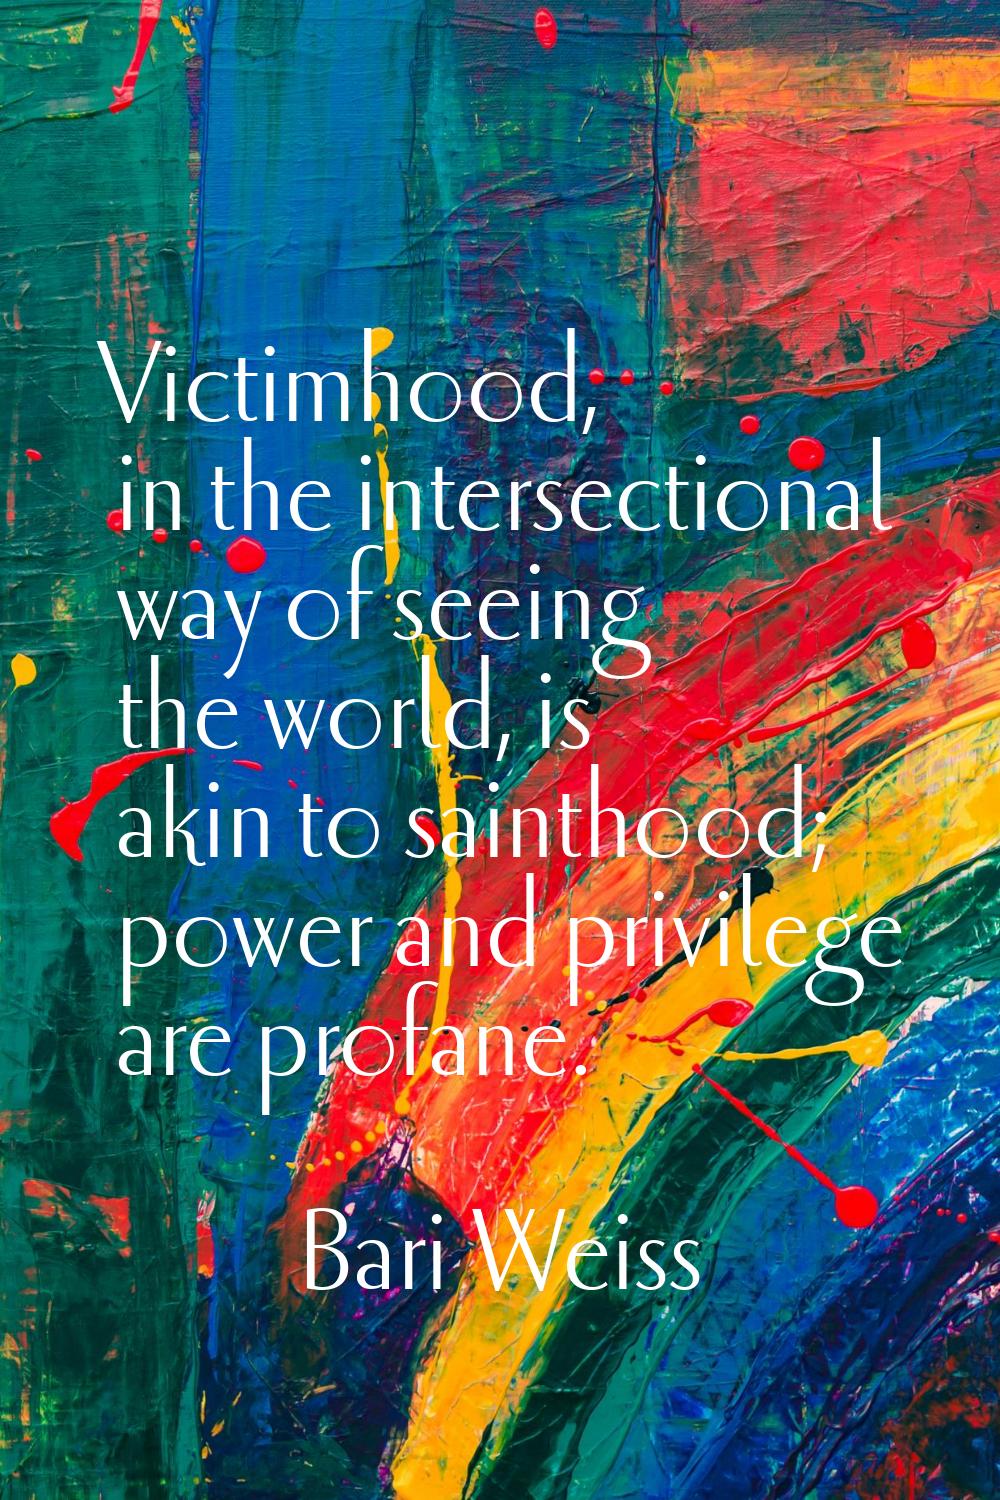 Victimhood, in the intersectional way of seeing the world, is akin to sainthood; power and privileg